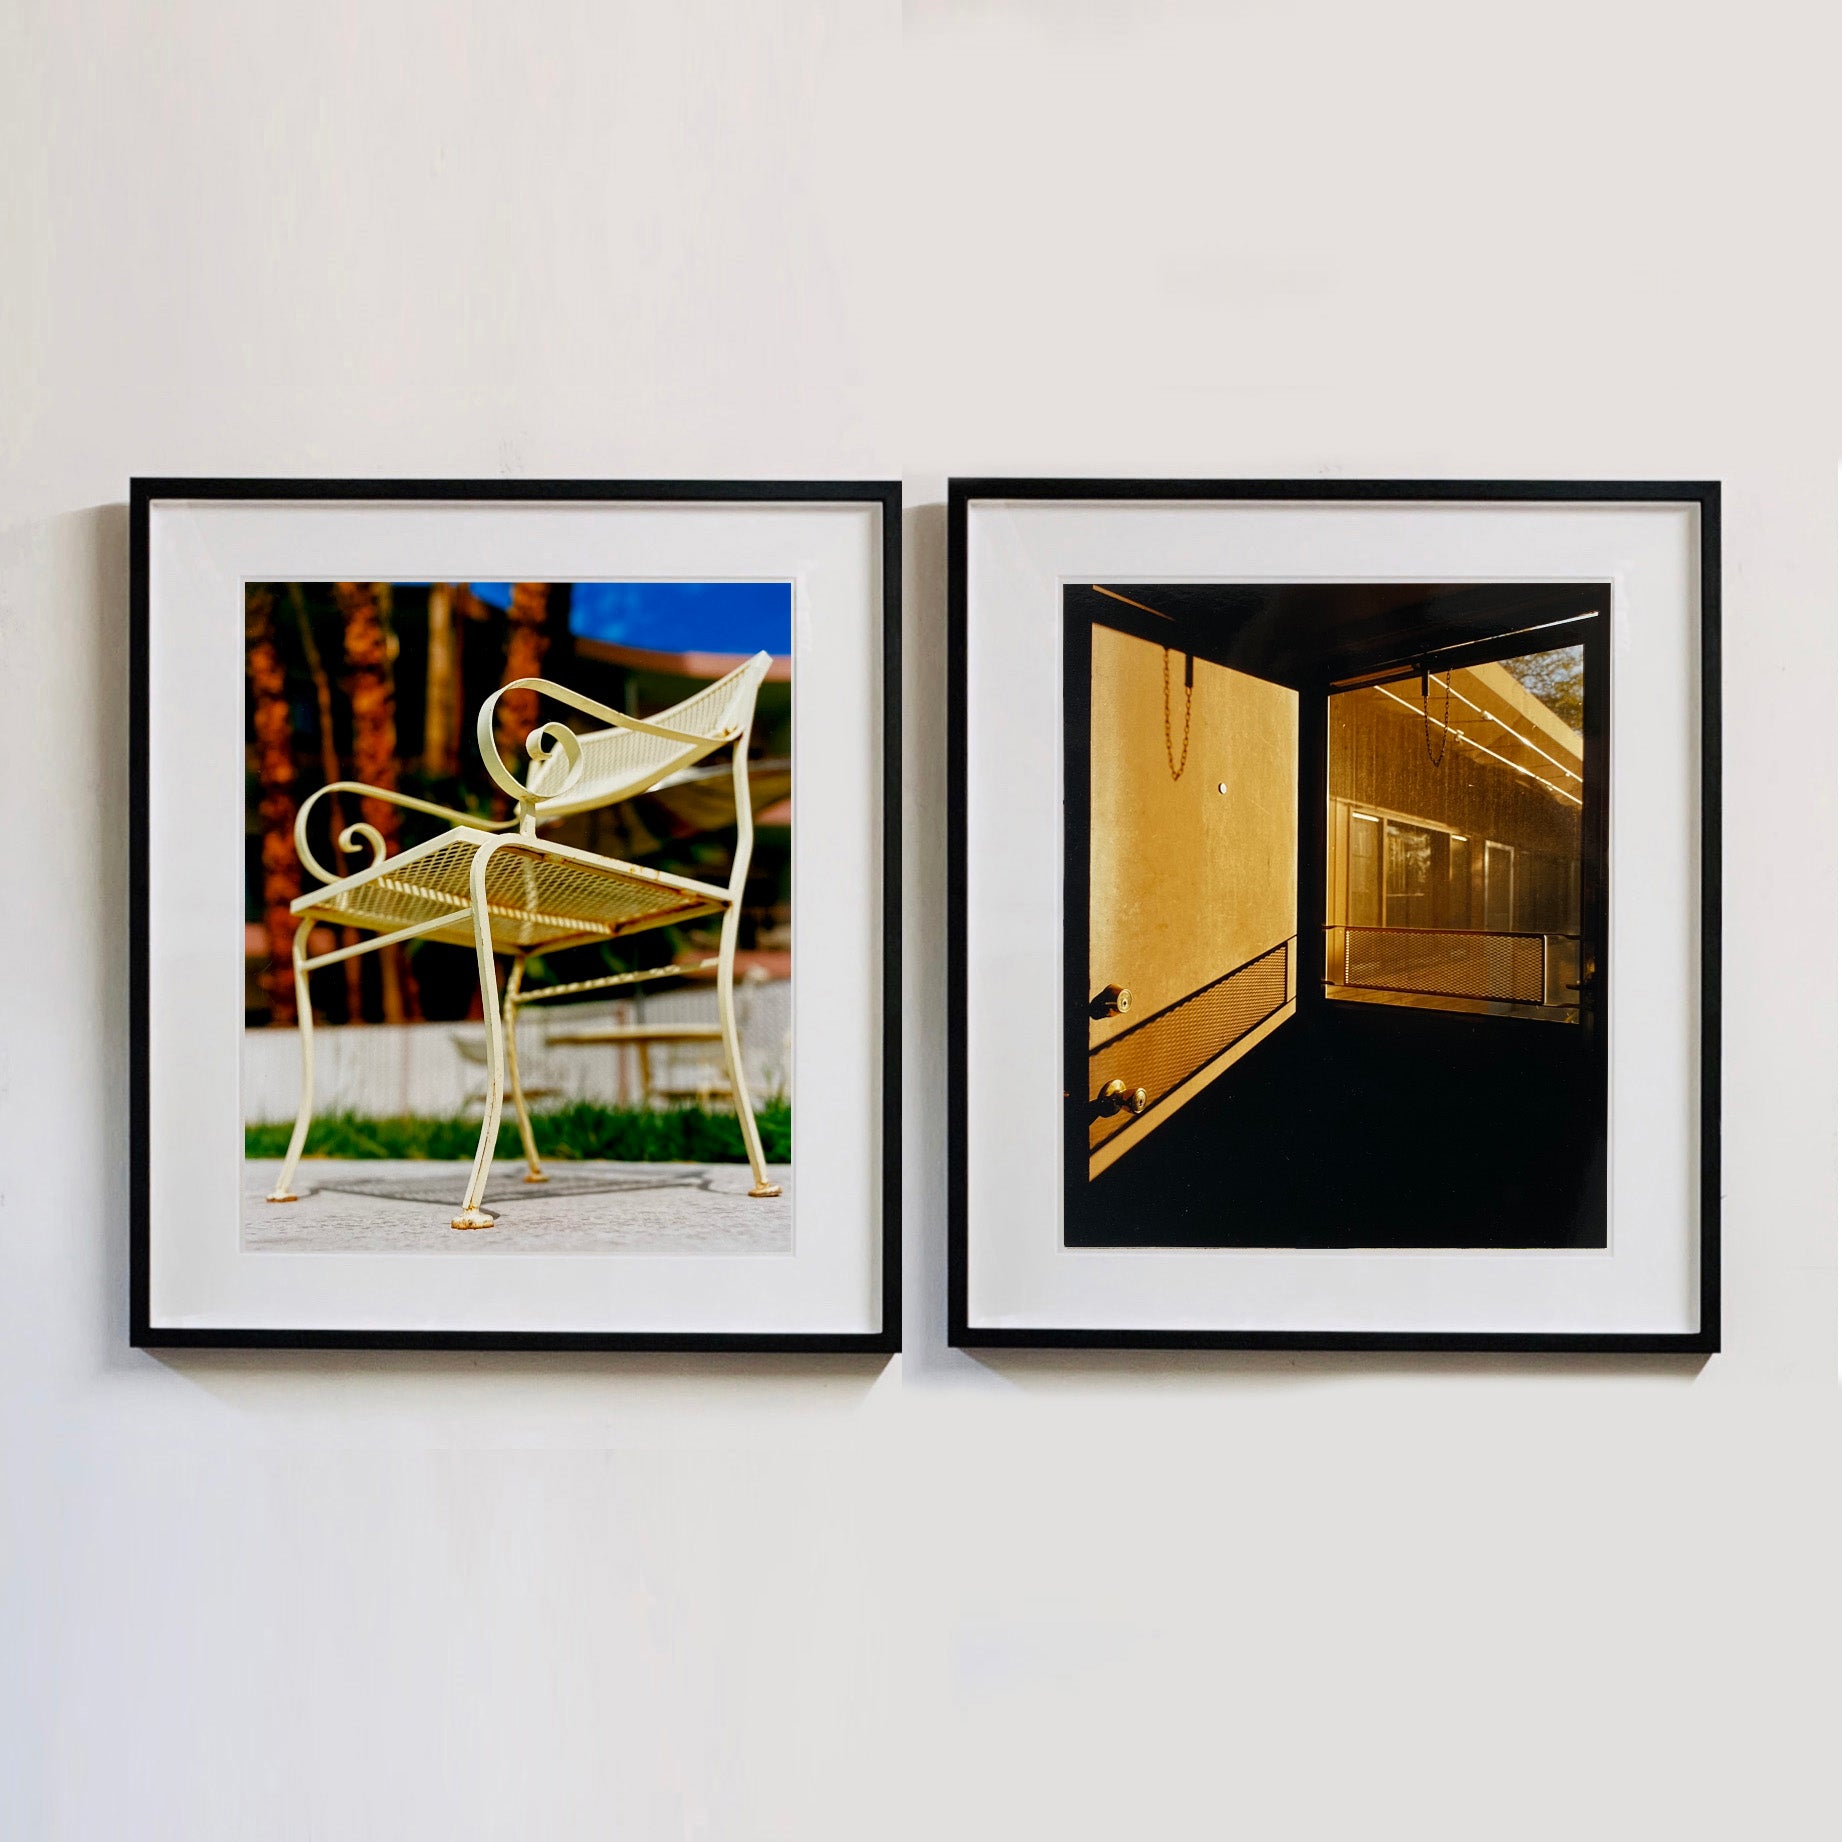 Two black framed photographs by Richard Heeps. The photograph on the left is of a cream chair sitting on hard standing, behind the chair and slightly out of focus is lush green grass and warm red tree trunks. The photograph on the right hand side depicts the evening sun casting a shadow as it glows through a window in a door.